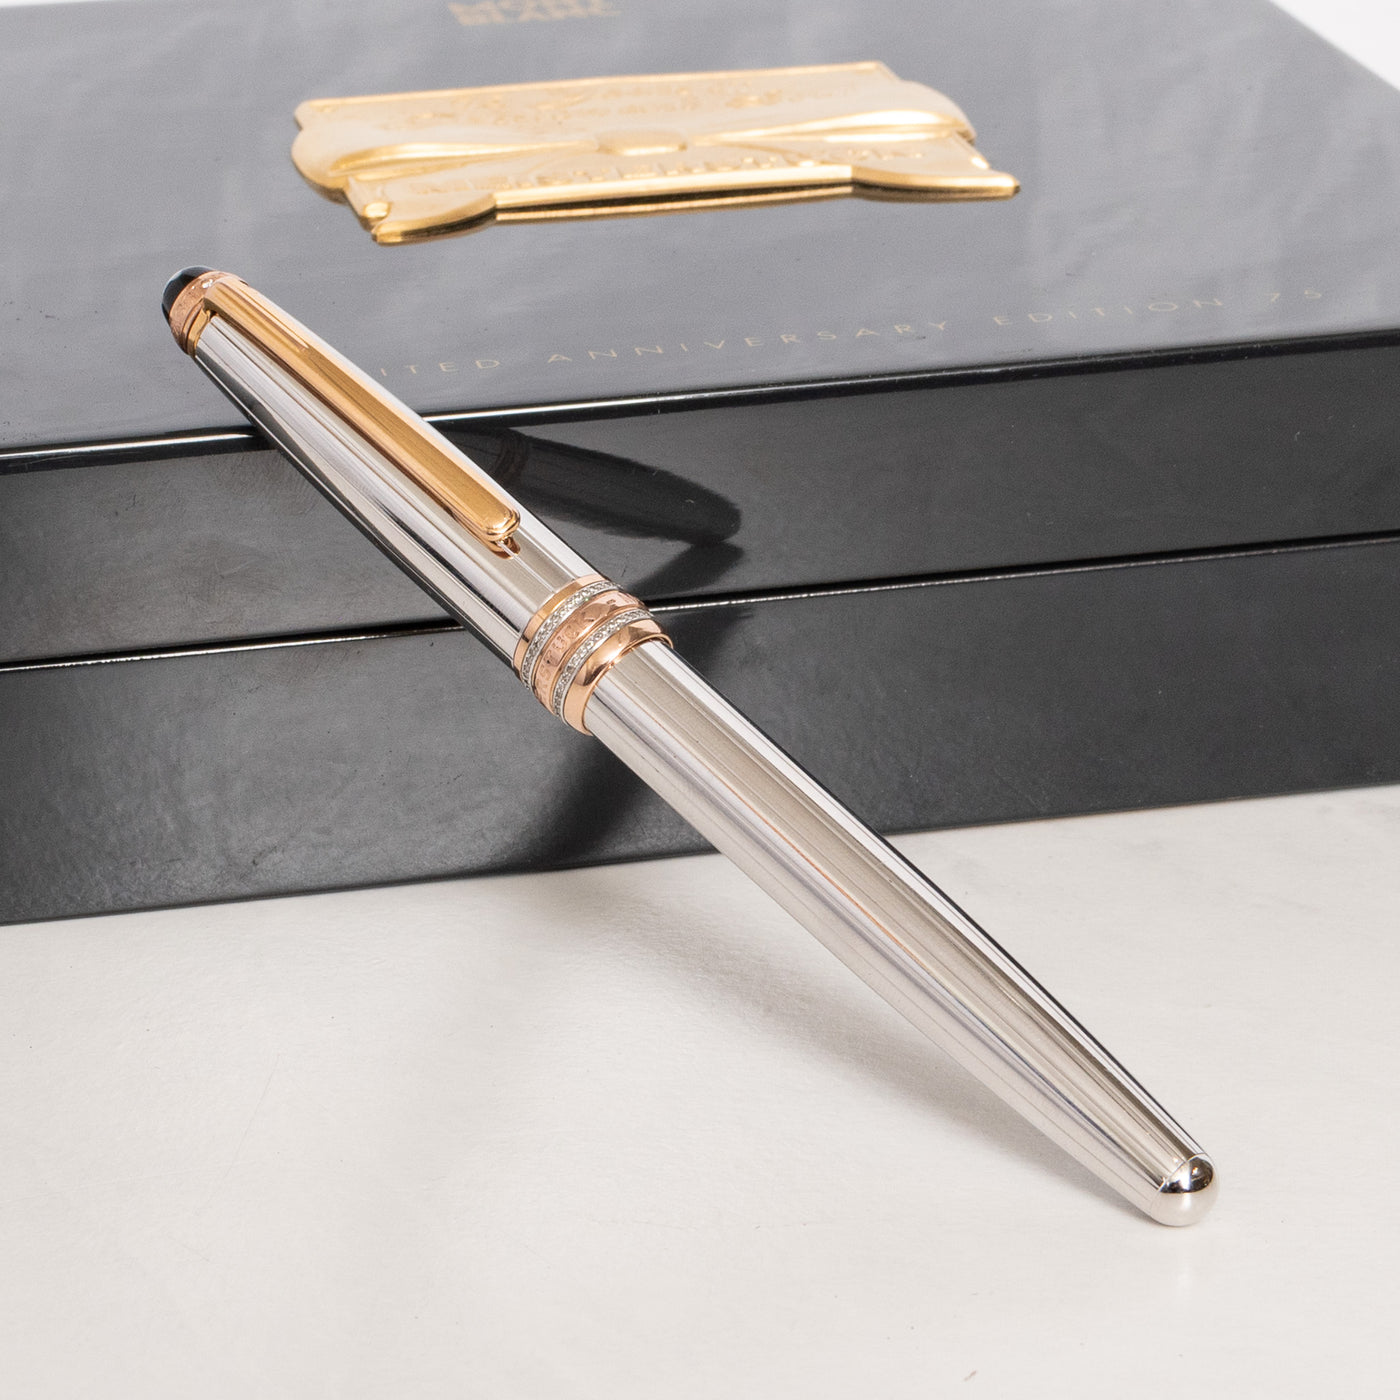 Montblanc Meisterstuck 144 75th Anniversary LE 75 Solid 18k Gold & Diamond Fountain Pen solid white gold diamonds